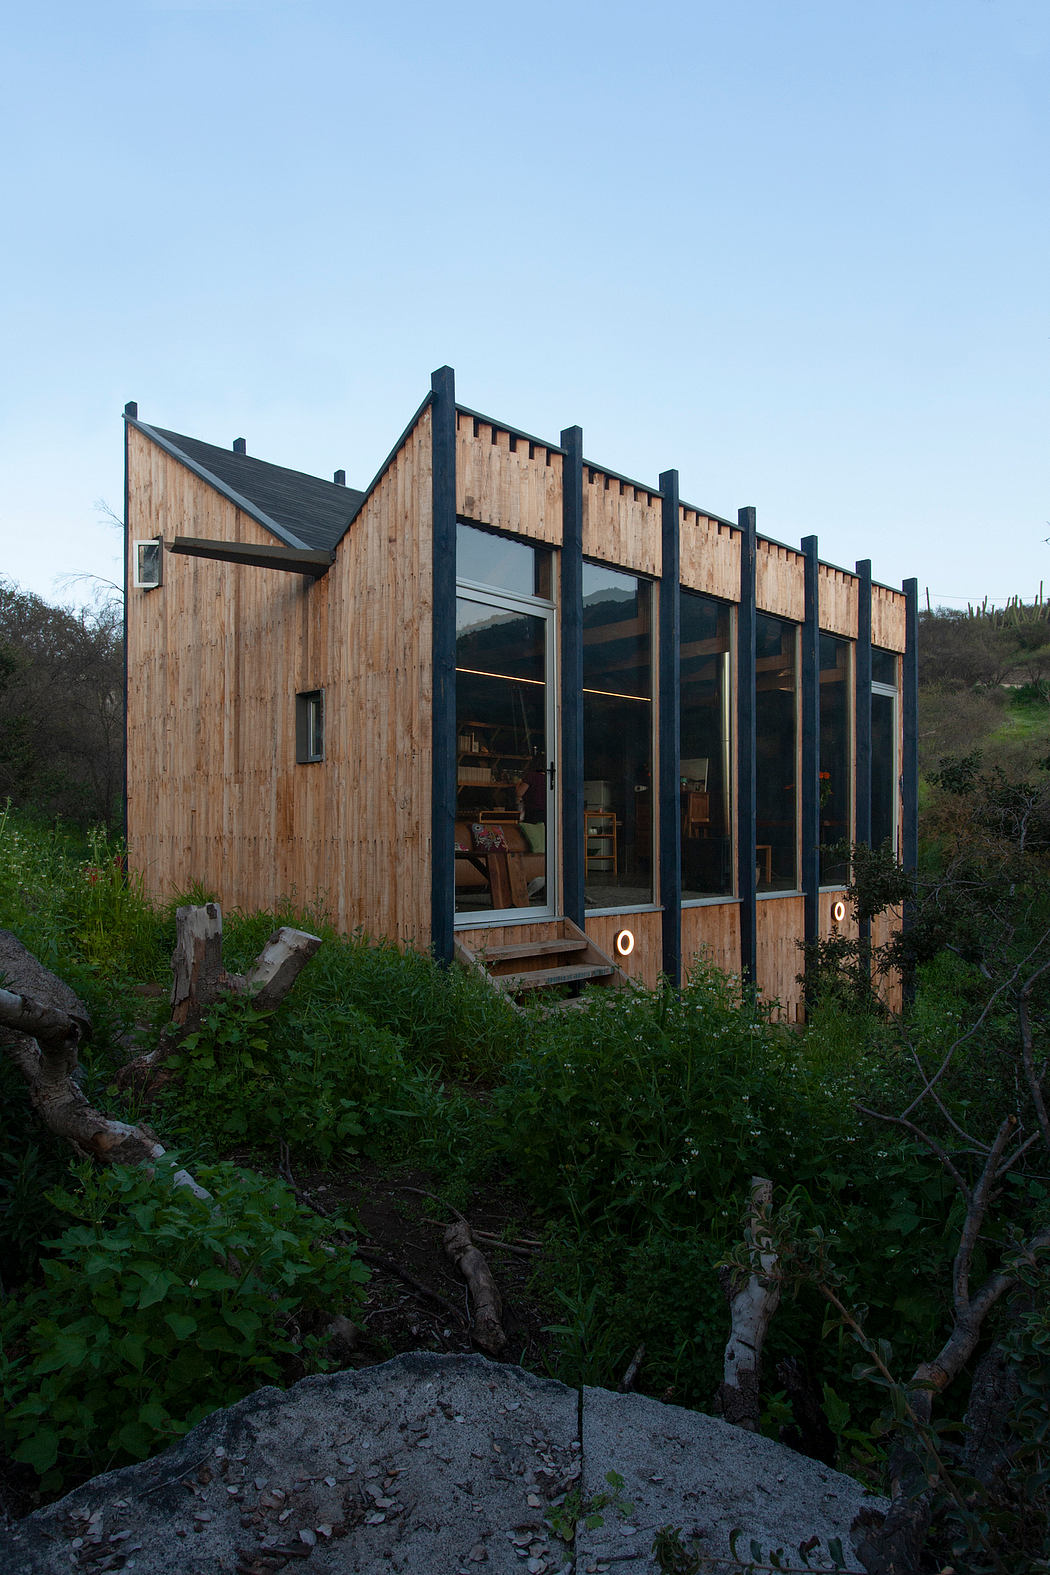 A modern, wood-paneled building with large windows overlooking a natural landscape.